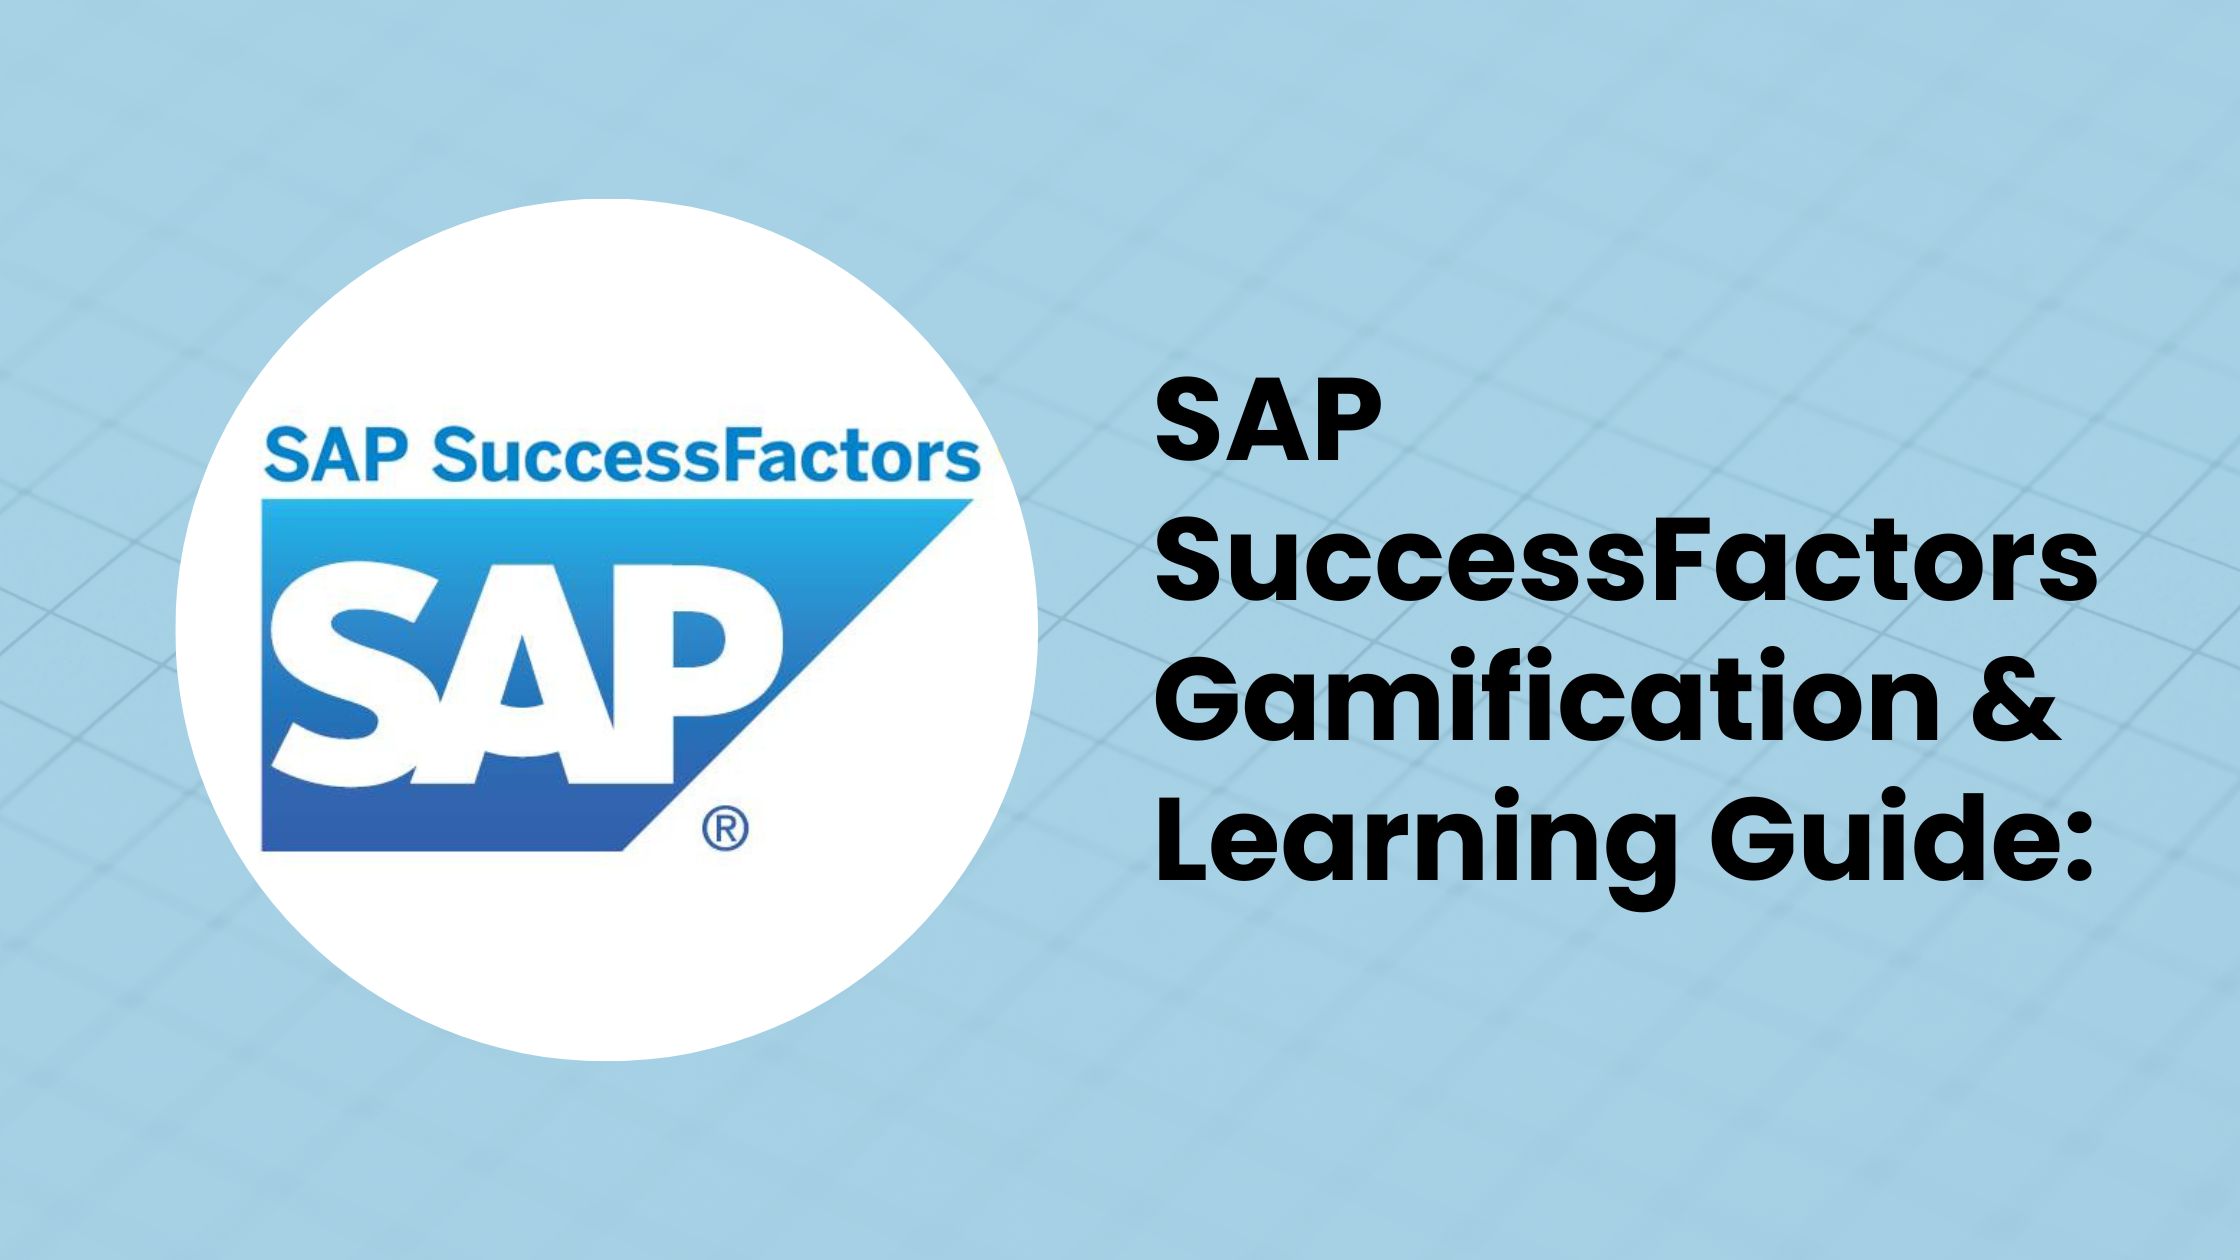 SAP SuccessFactors Gamification & Learning Guide: Boosting Engagement and Performance